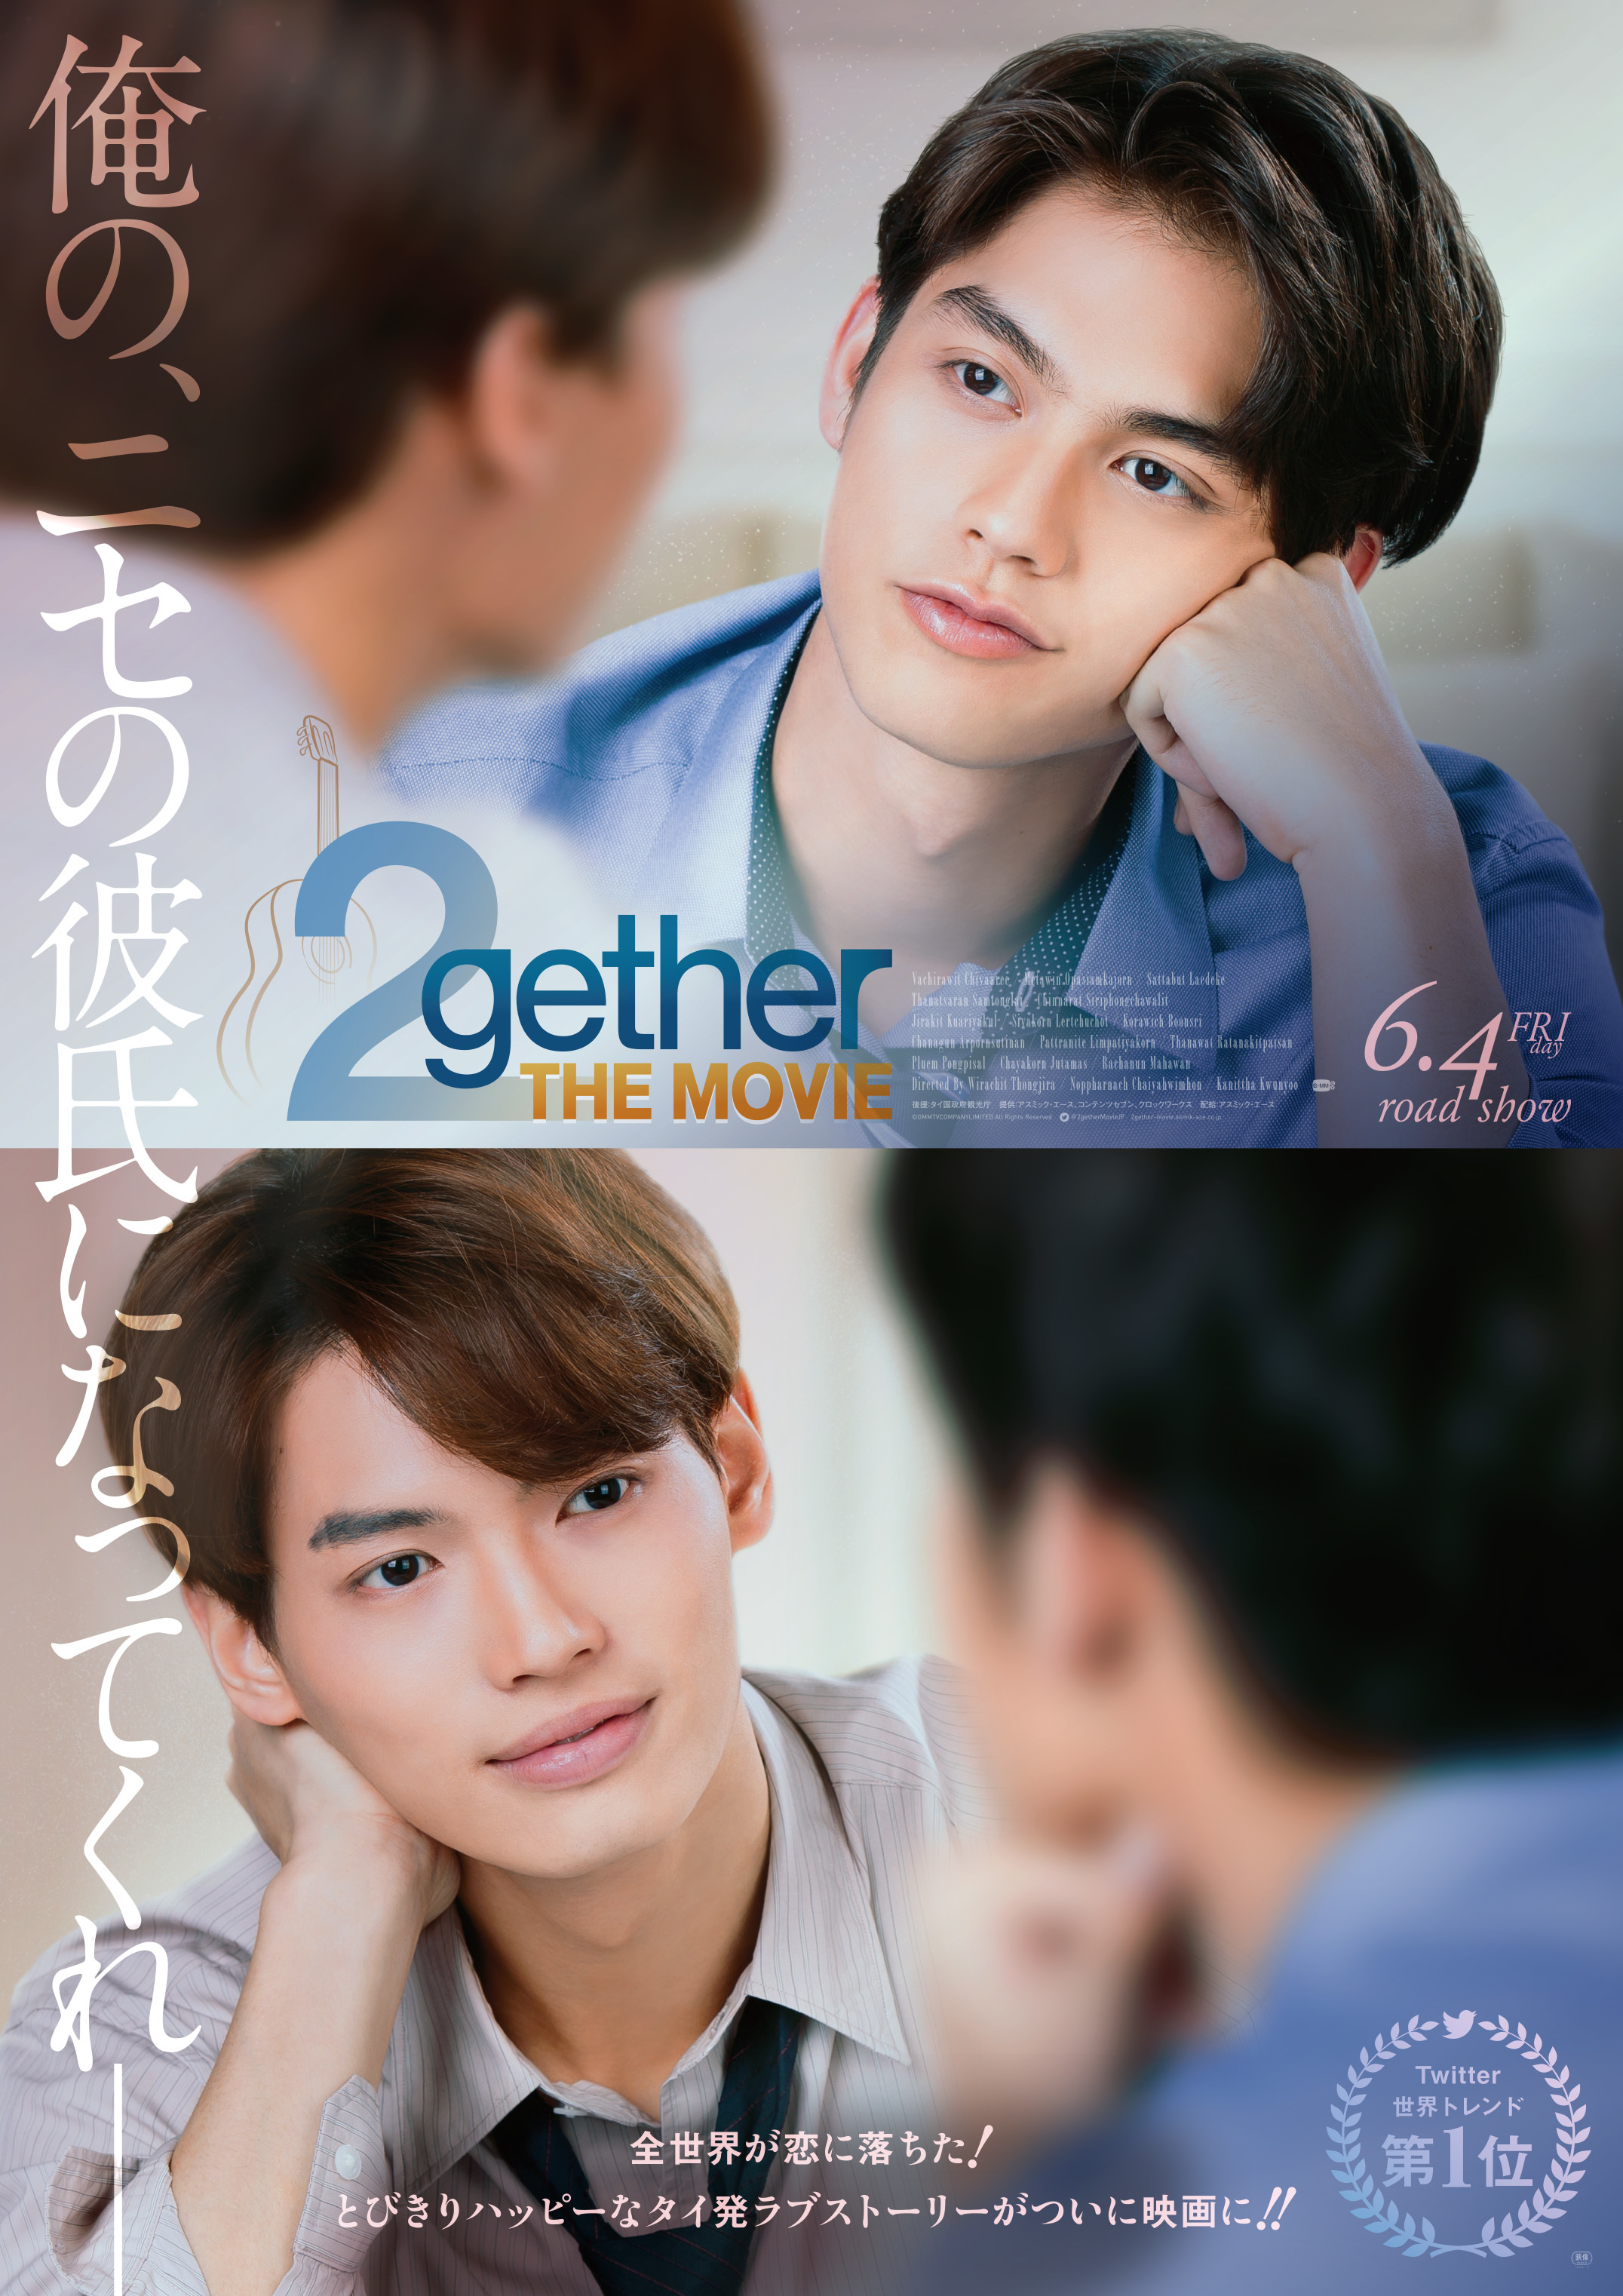 『2gether THE MOVIE』 （C)GMMTV